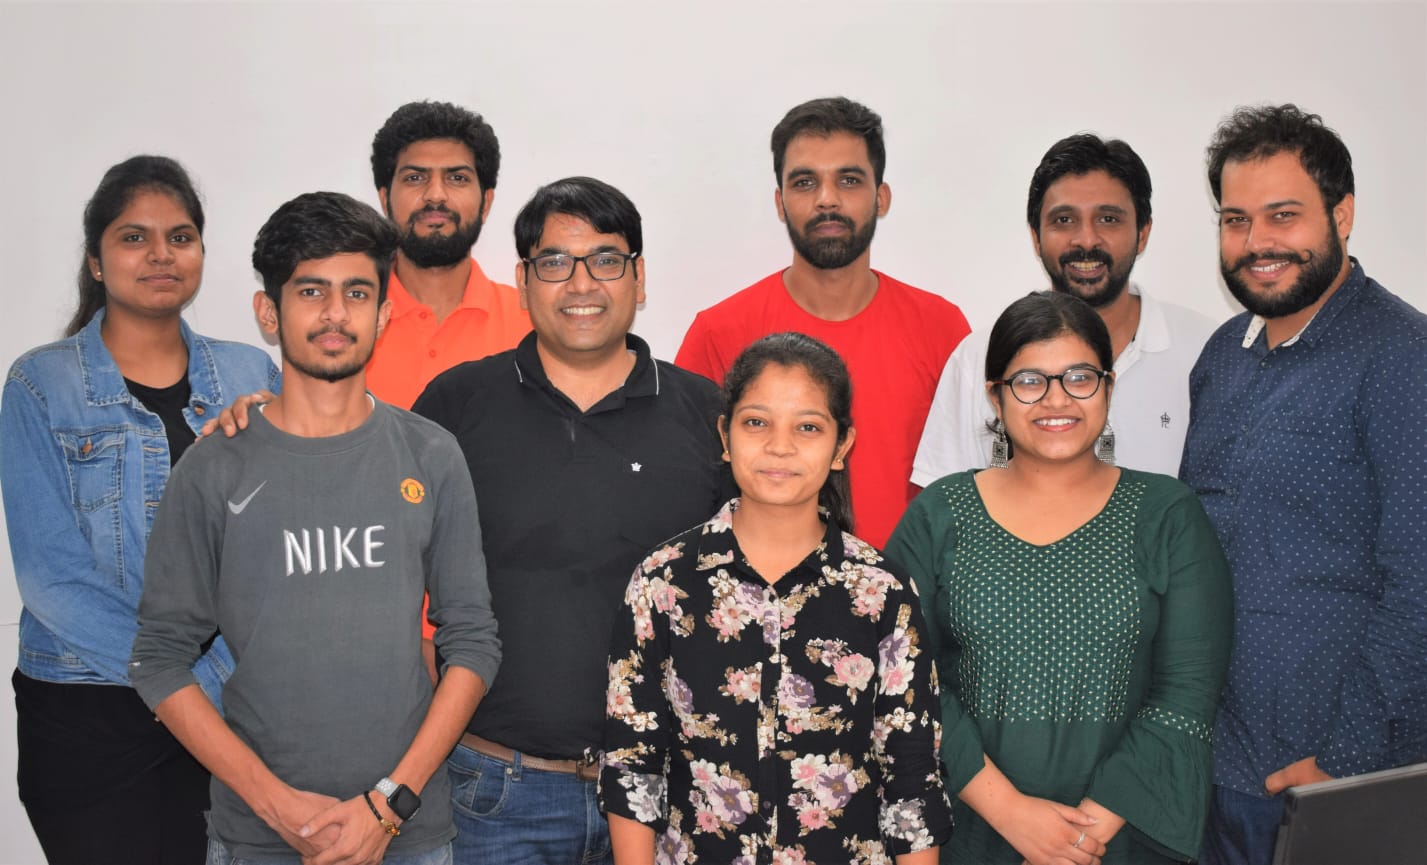 ockypocky-to-strengthen-innovation-and-focus-on-tier-ii-and-iii-regions-in-india-raises-seed-funding-from-sujeet-founder-udaan-and-sucseed-indovation-fund